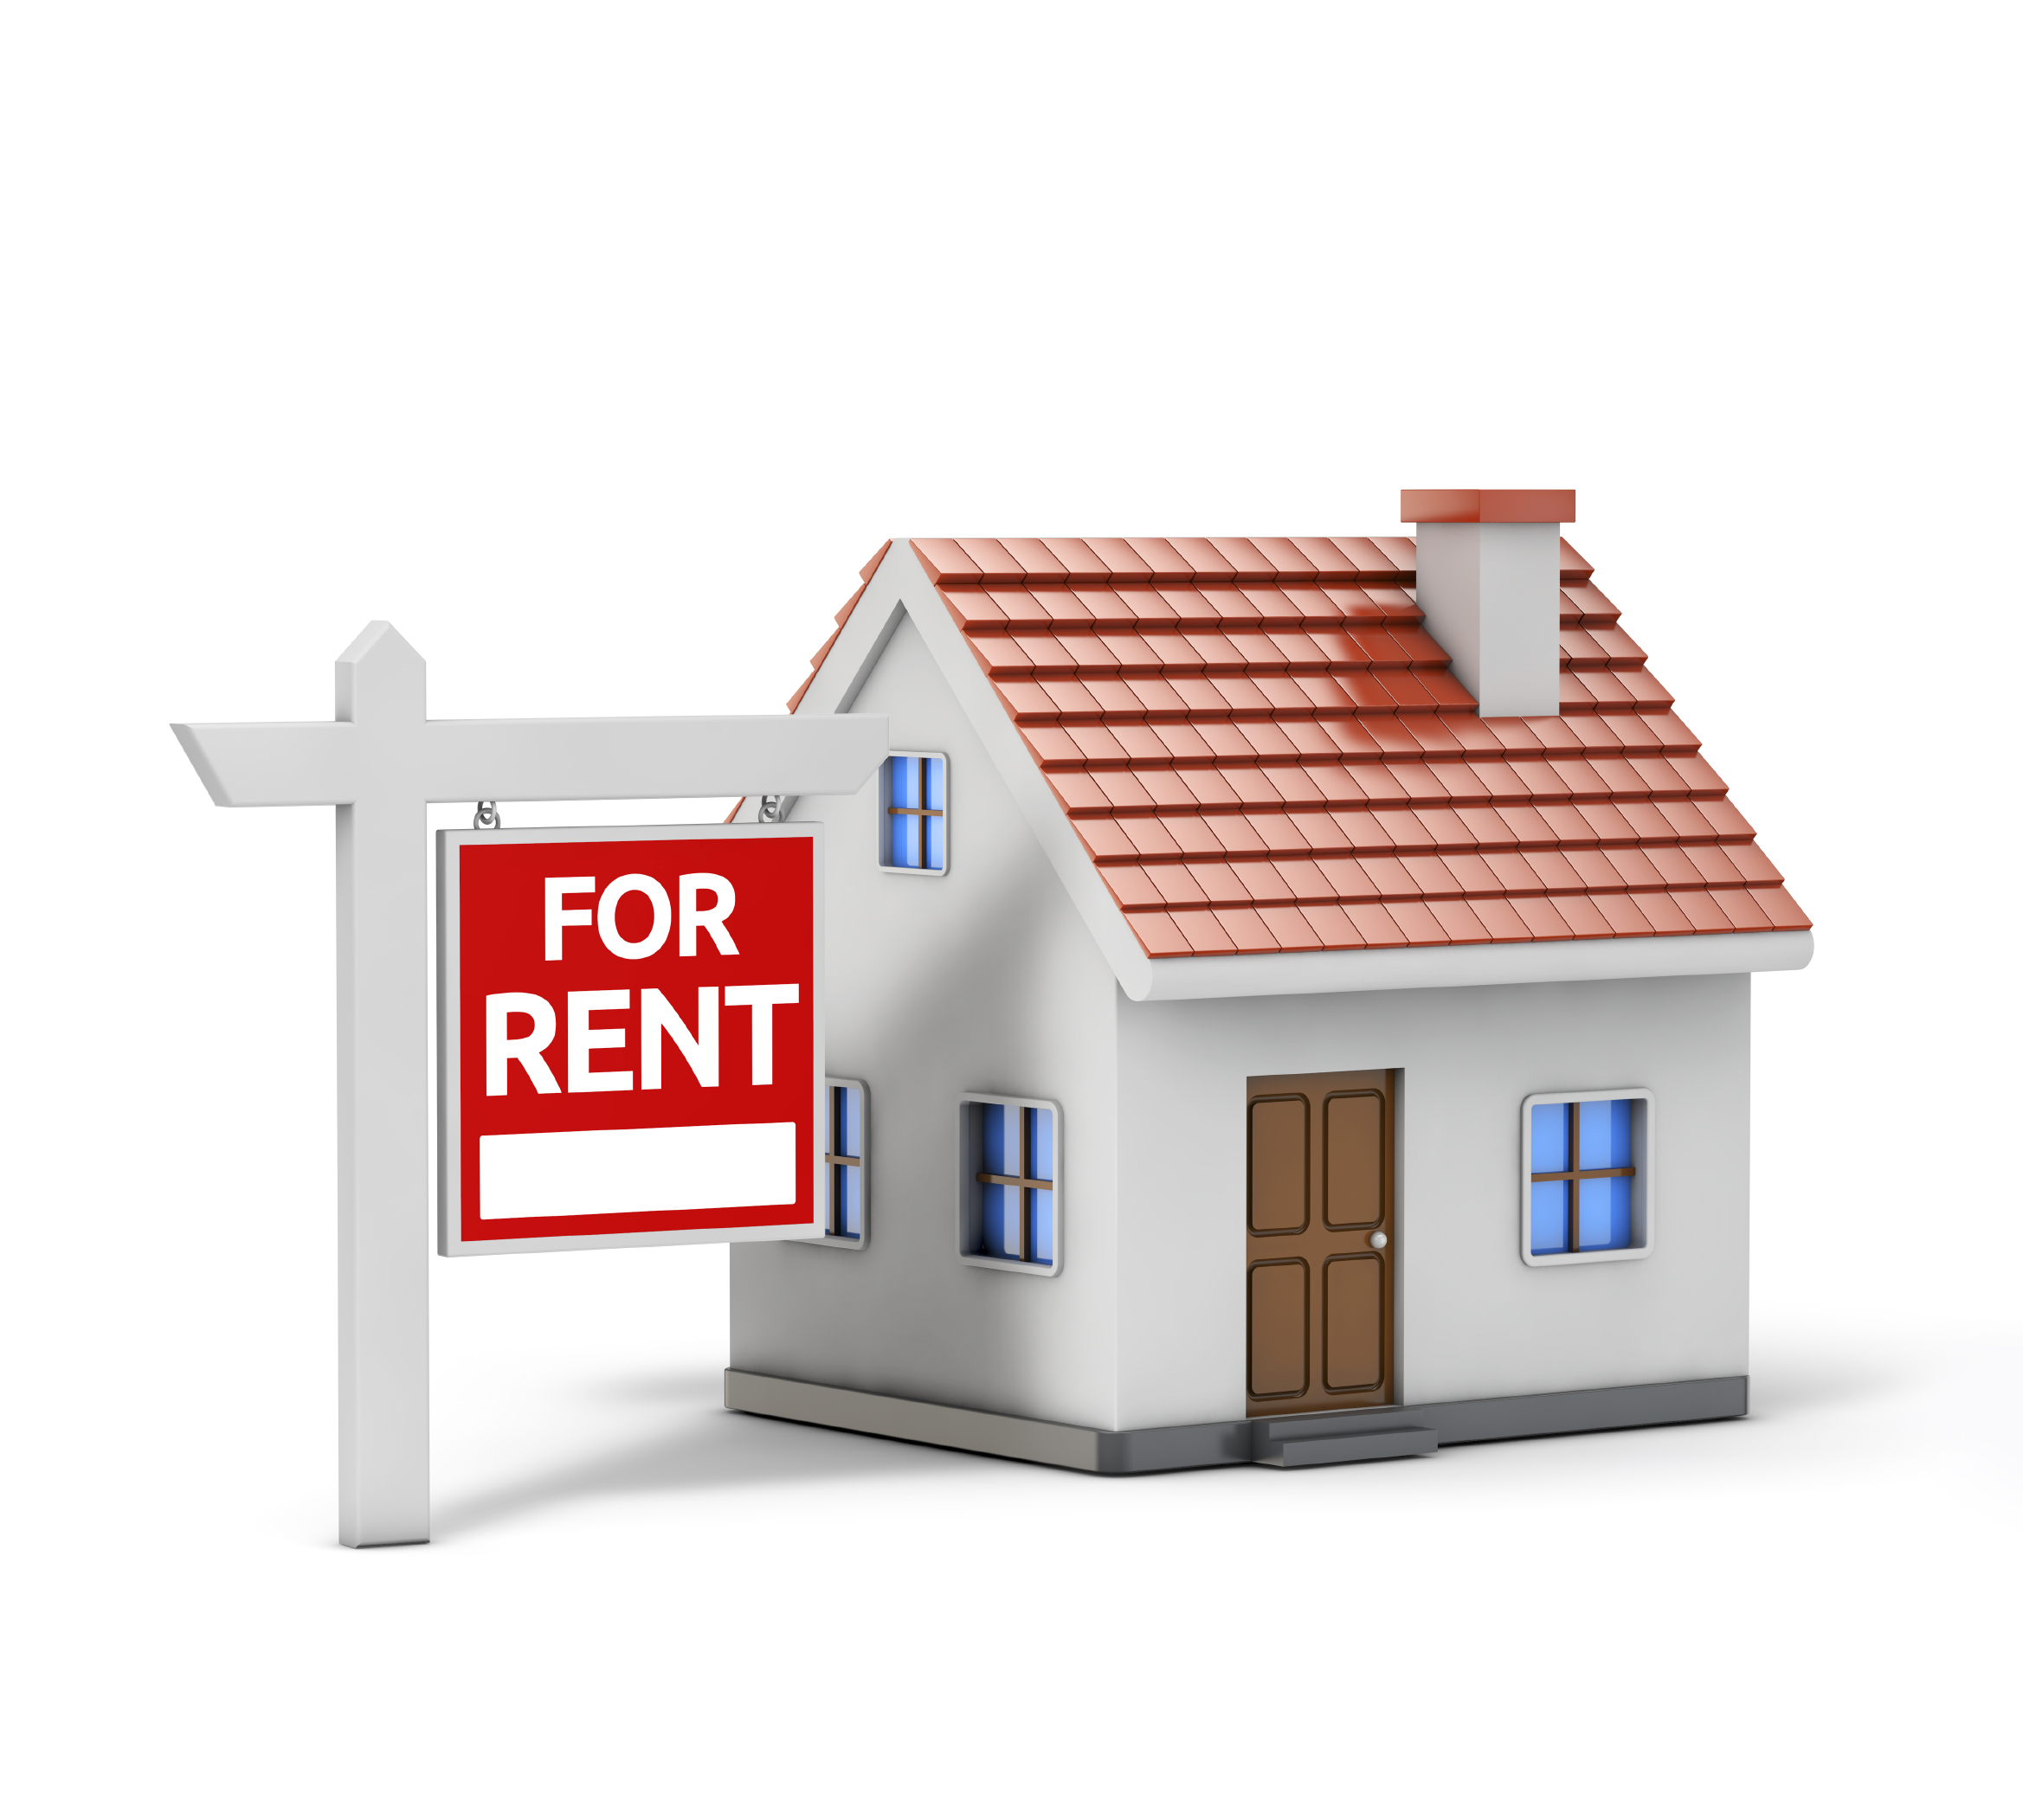 There are many questions to ask in the lettings market when investing in rental properties